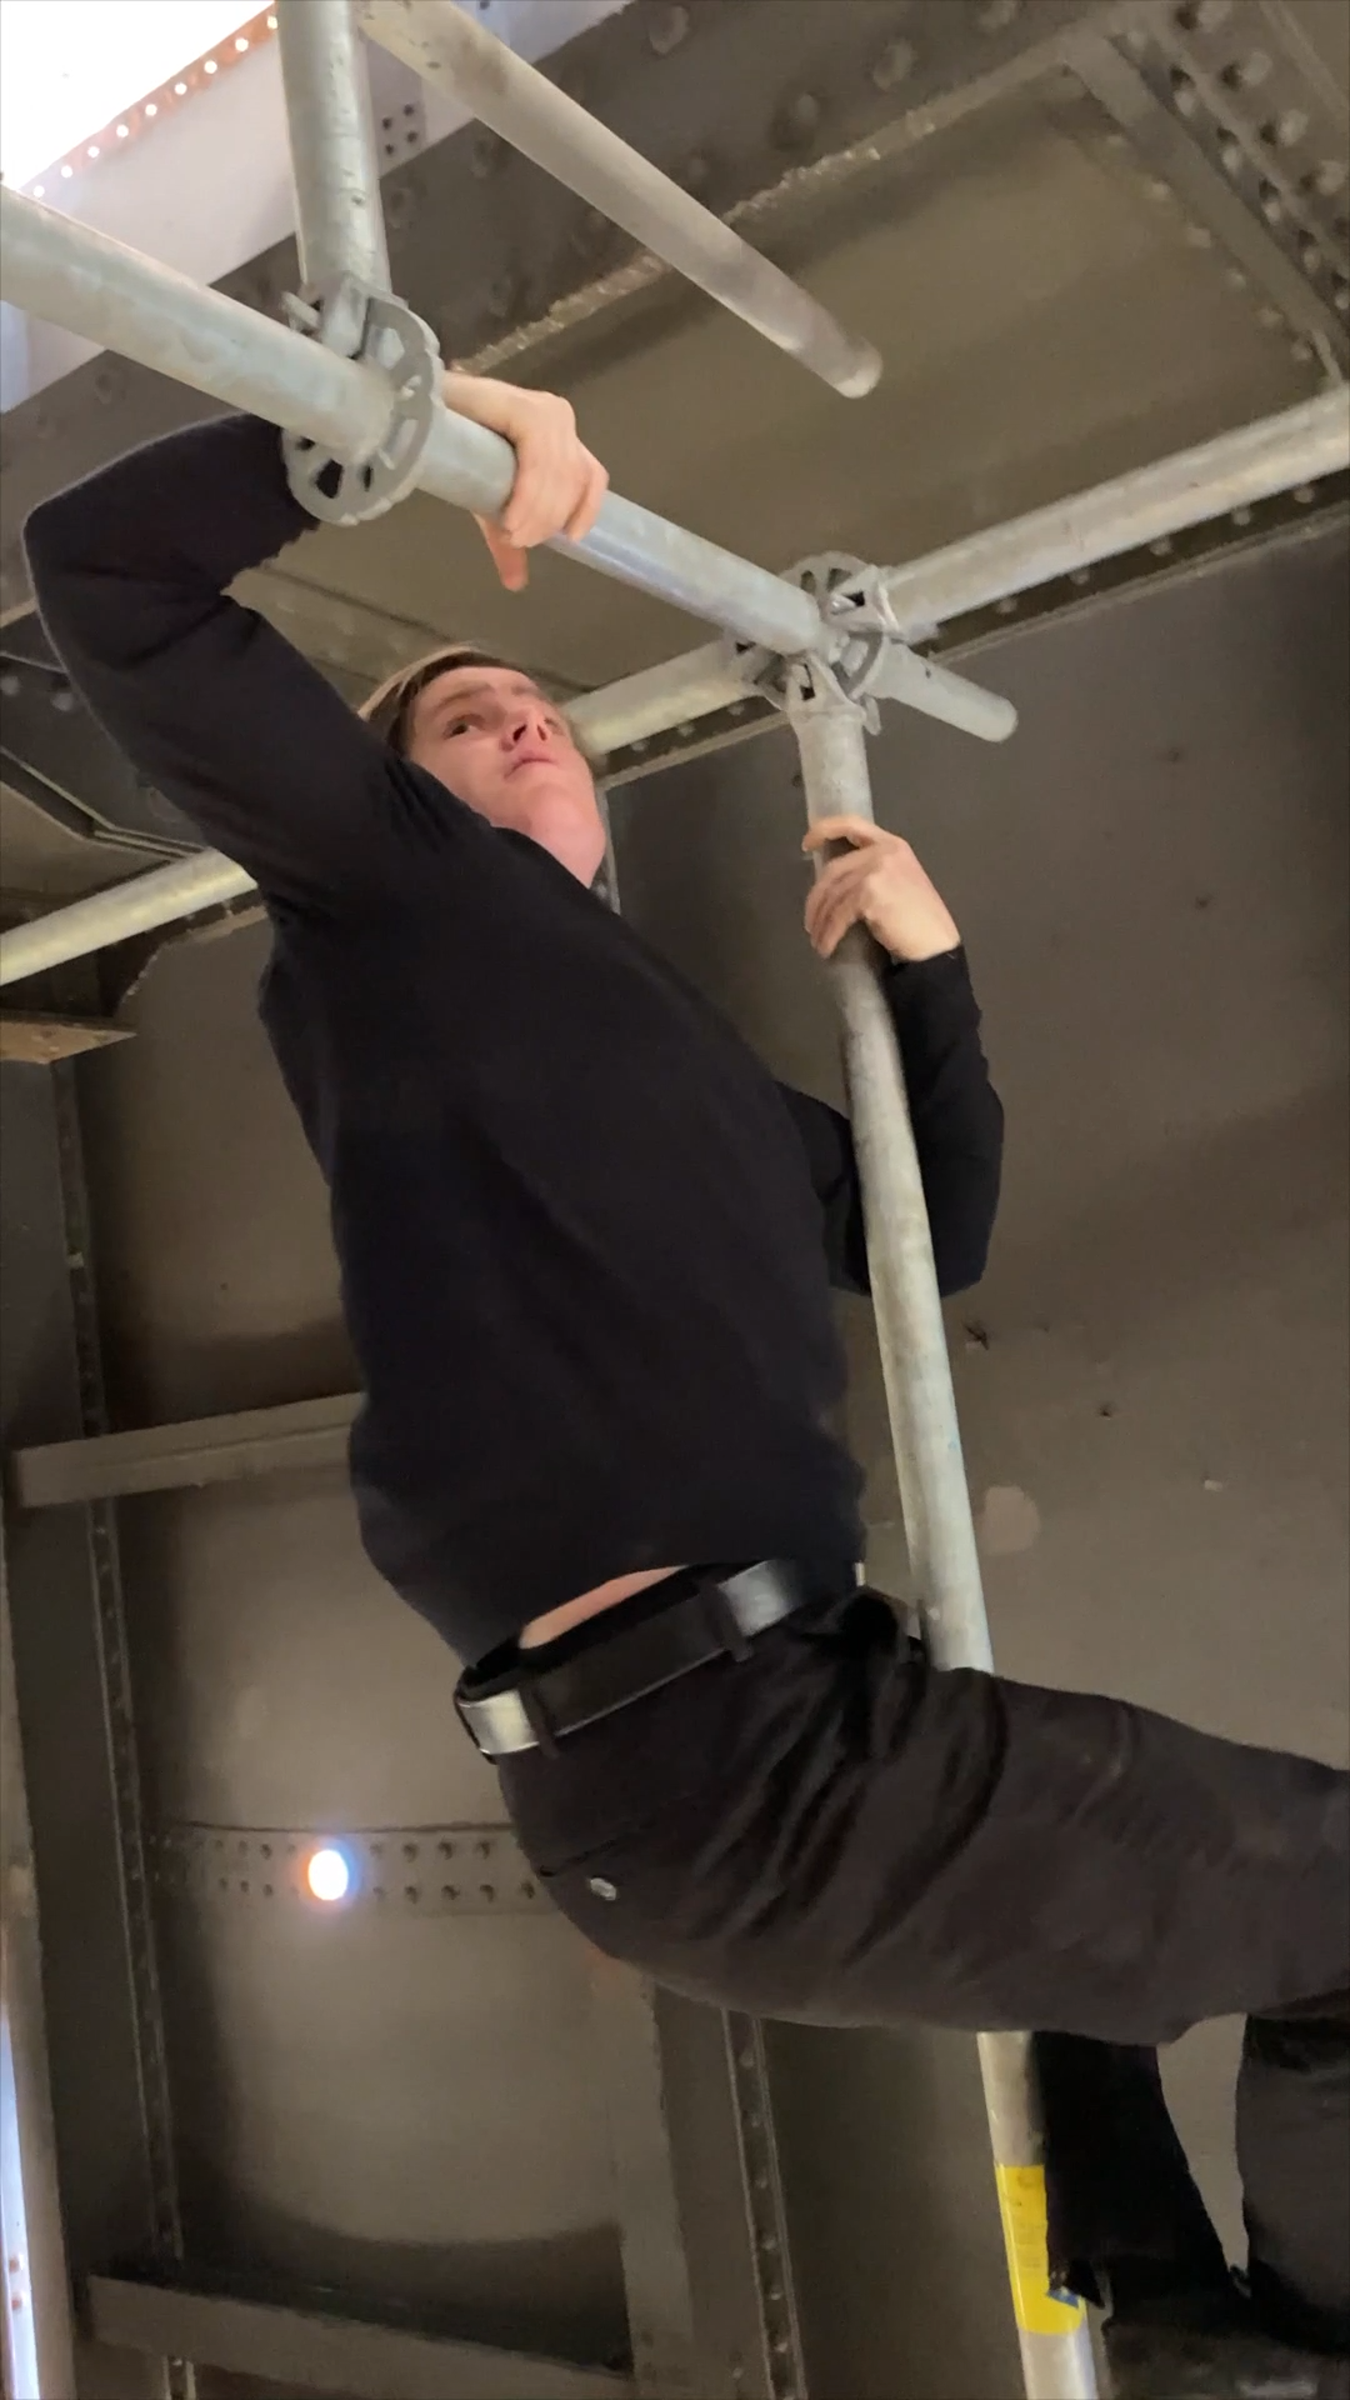 Person wearing a black outfit climbing on some scaffolding situated indoors.